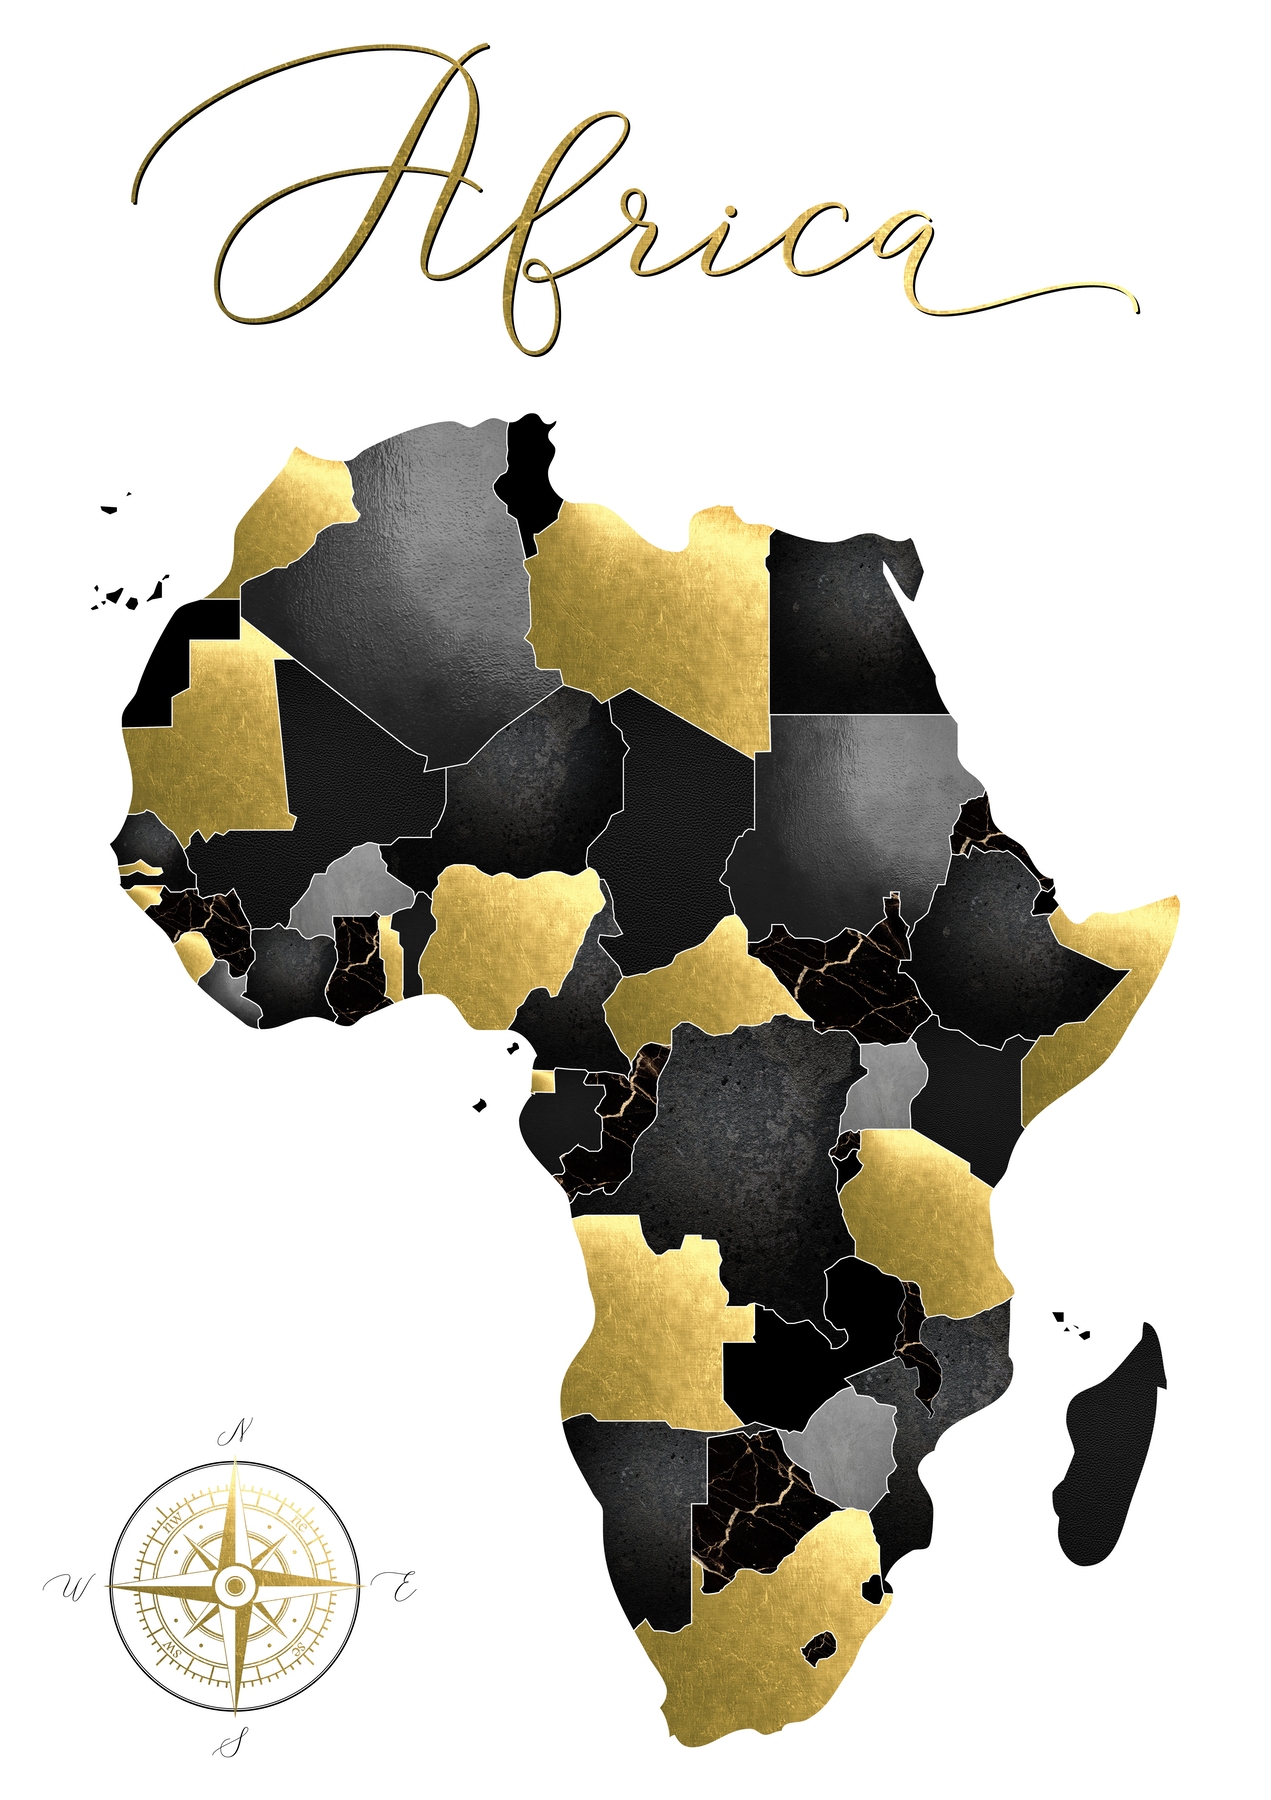 Buy Africa Map wallpaper US shipping at Happywall.com